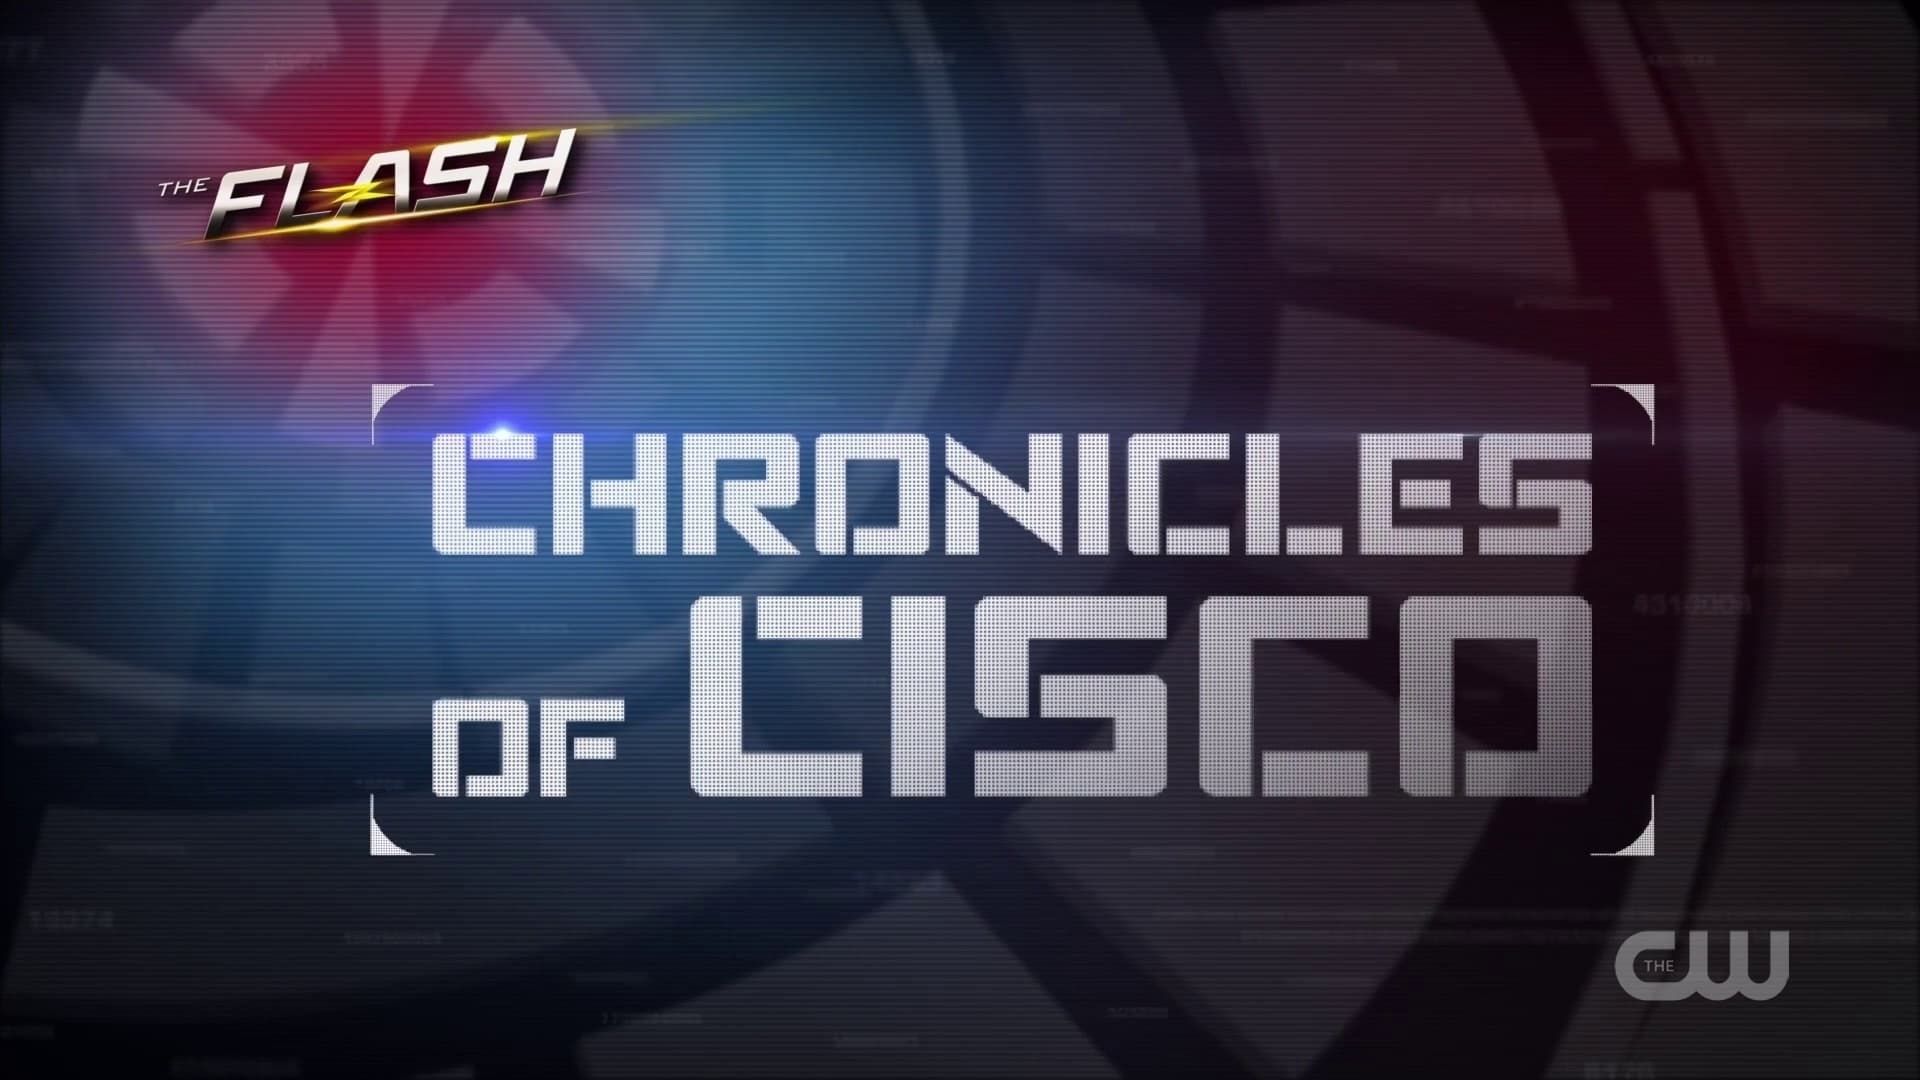 The Flash: Chronicles of Cisco background